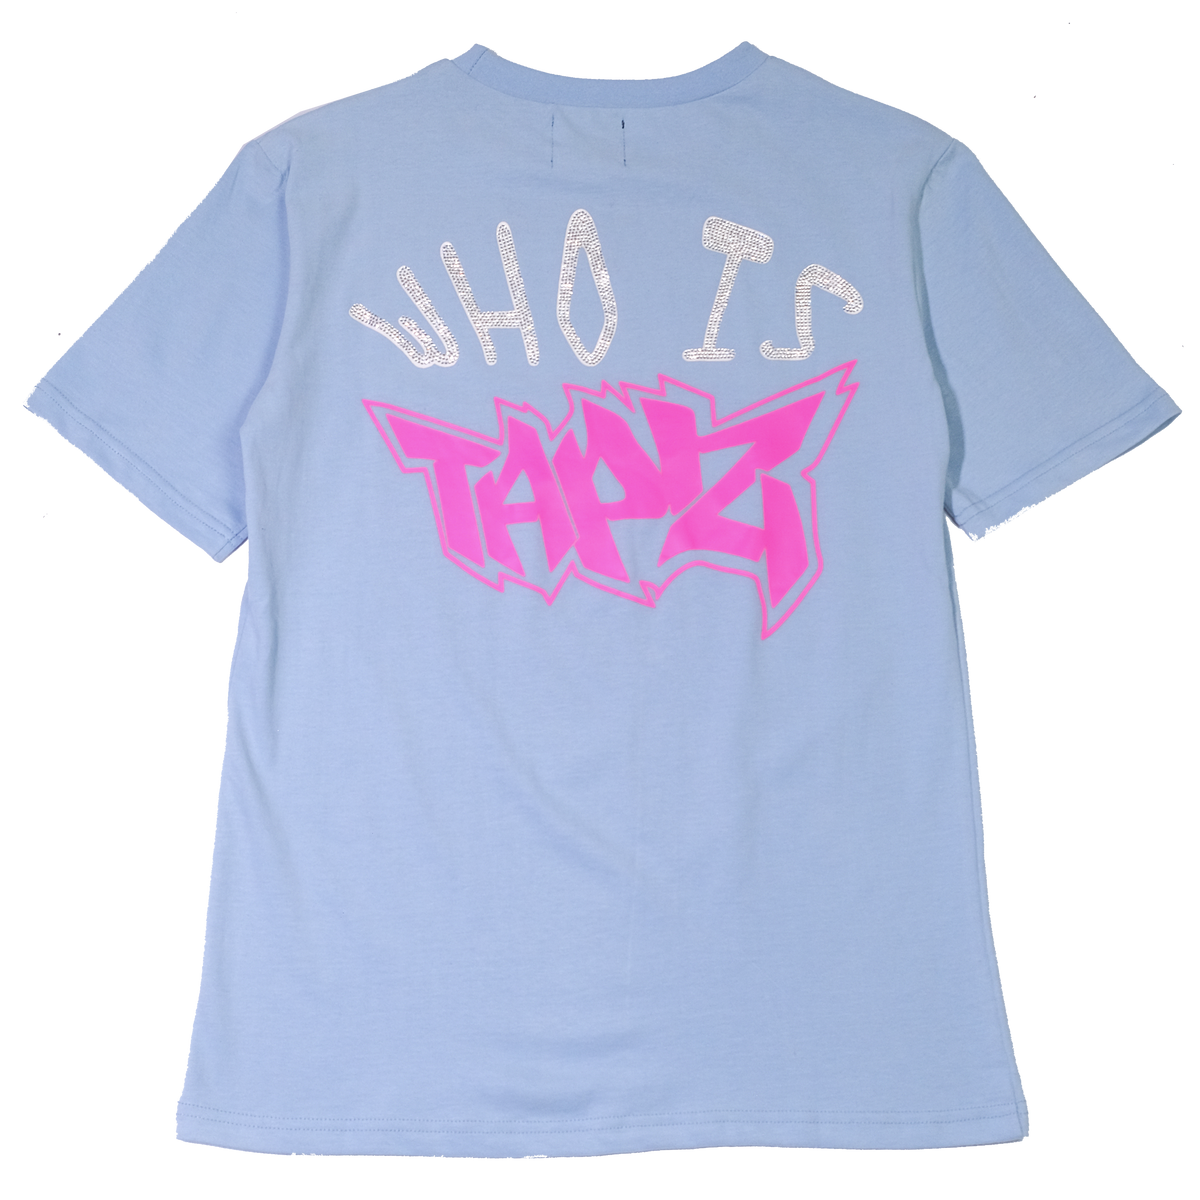 12. WHO IS TAPZ T-Shirt – S.W.A.N.K